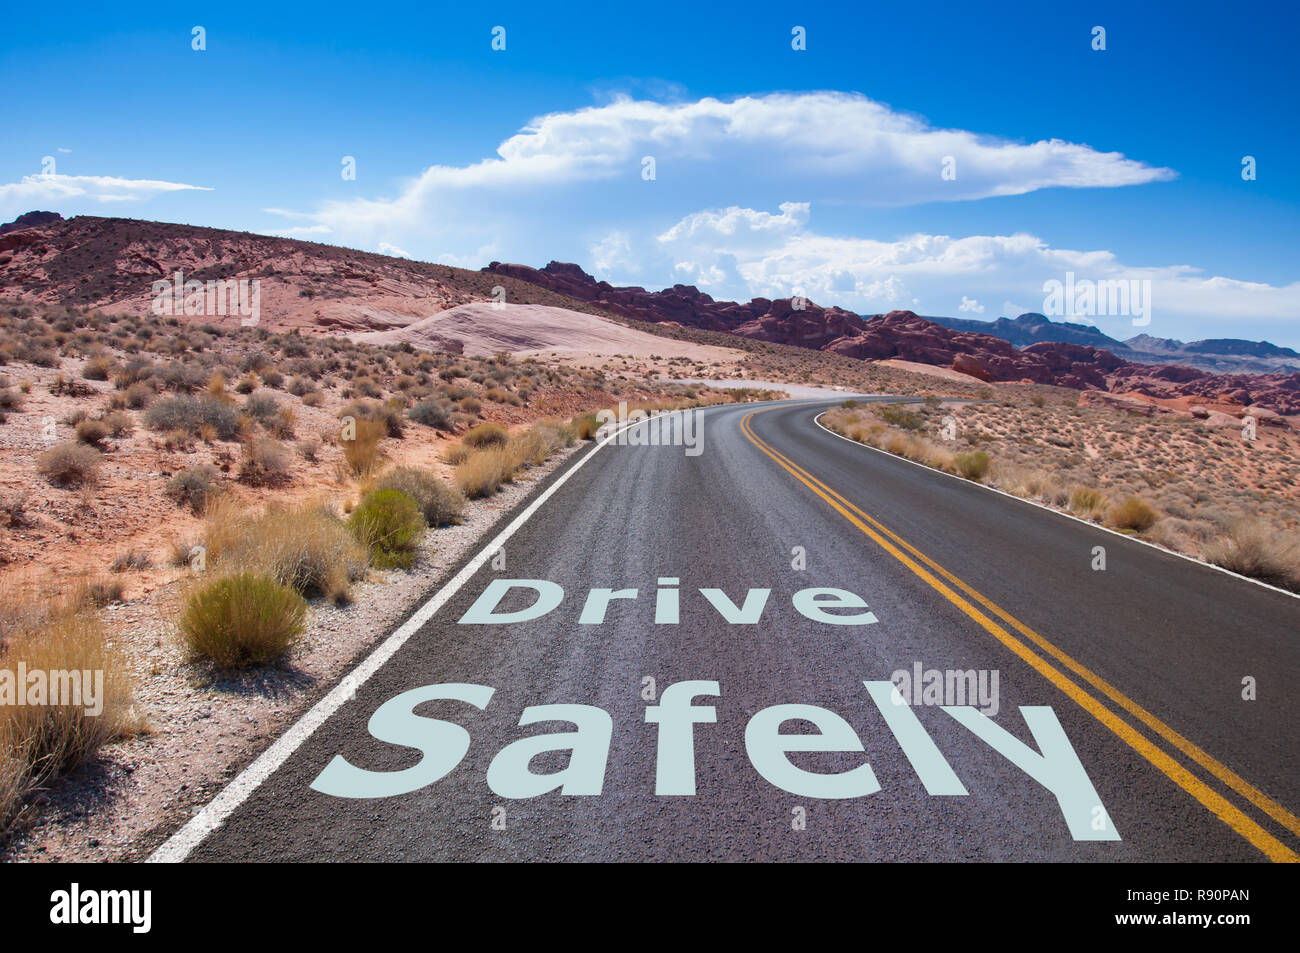 The text 'DRIVE SAFELY' written on a empty road in the desert of Nevada before the street turns right Stock Photo